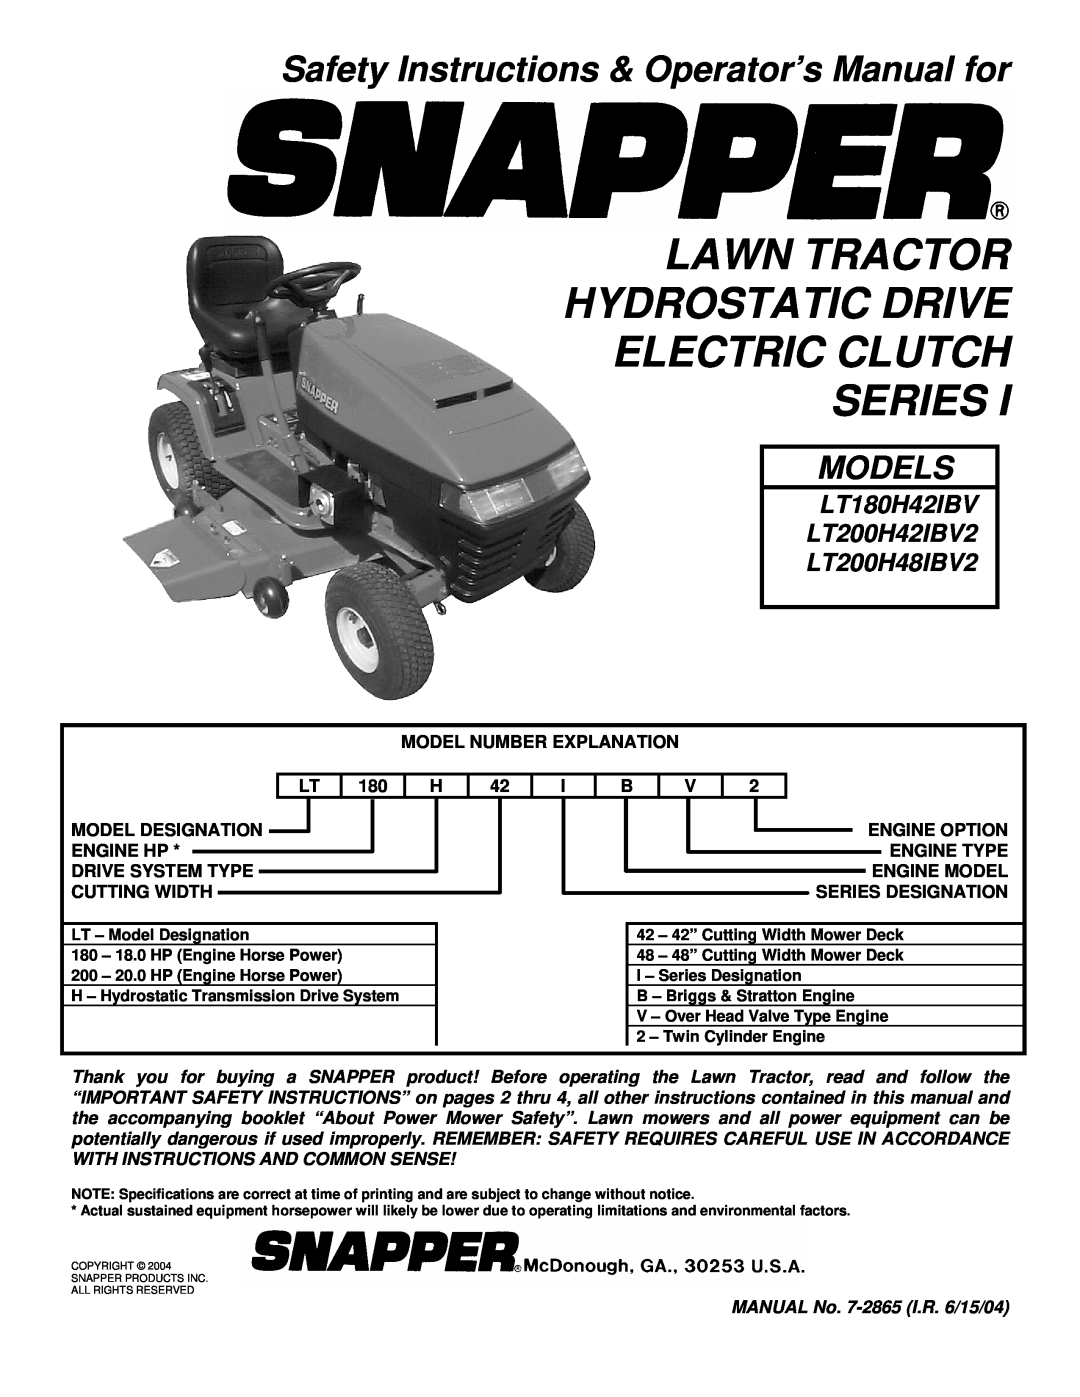 Snapper LT180H42IBV2, LT200H42IBV2, LT200H48IBV2 important safety instructions Safety Instructions & Operator’s Manual for 